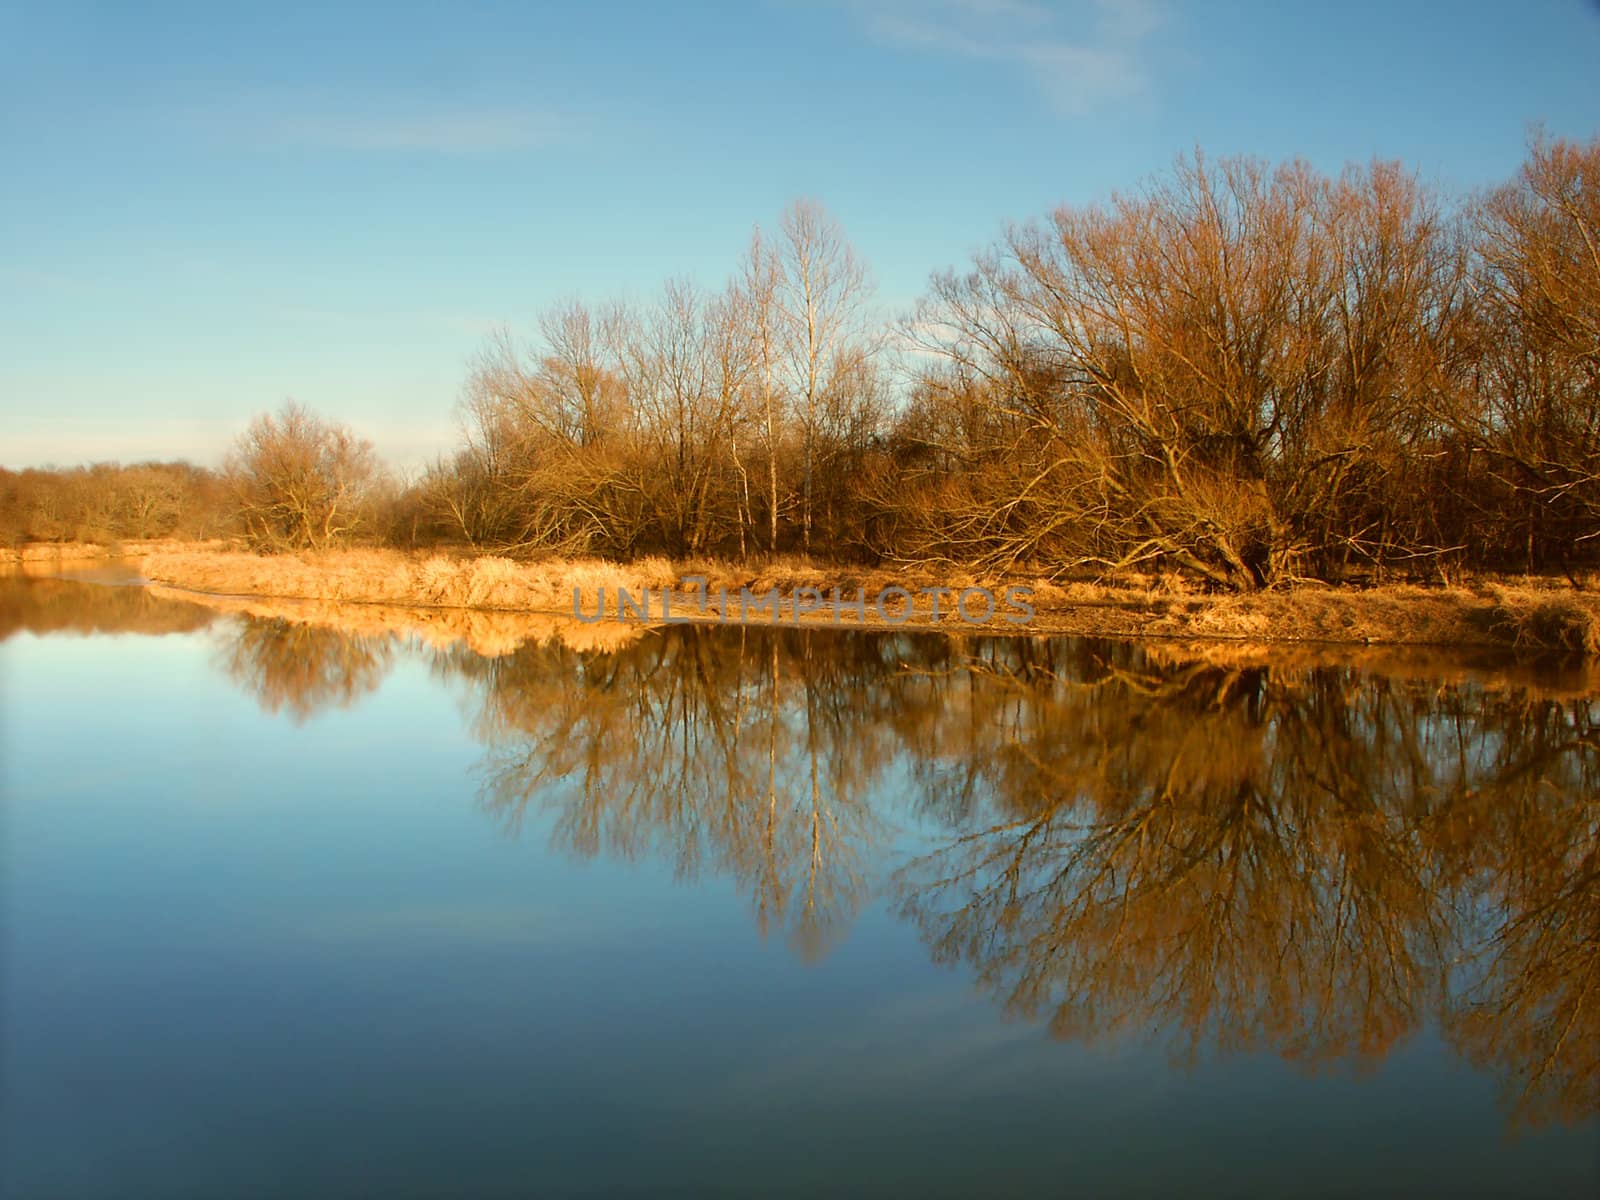 Kishwaukee River in Illinois by Wirepec